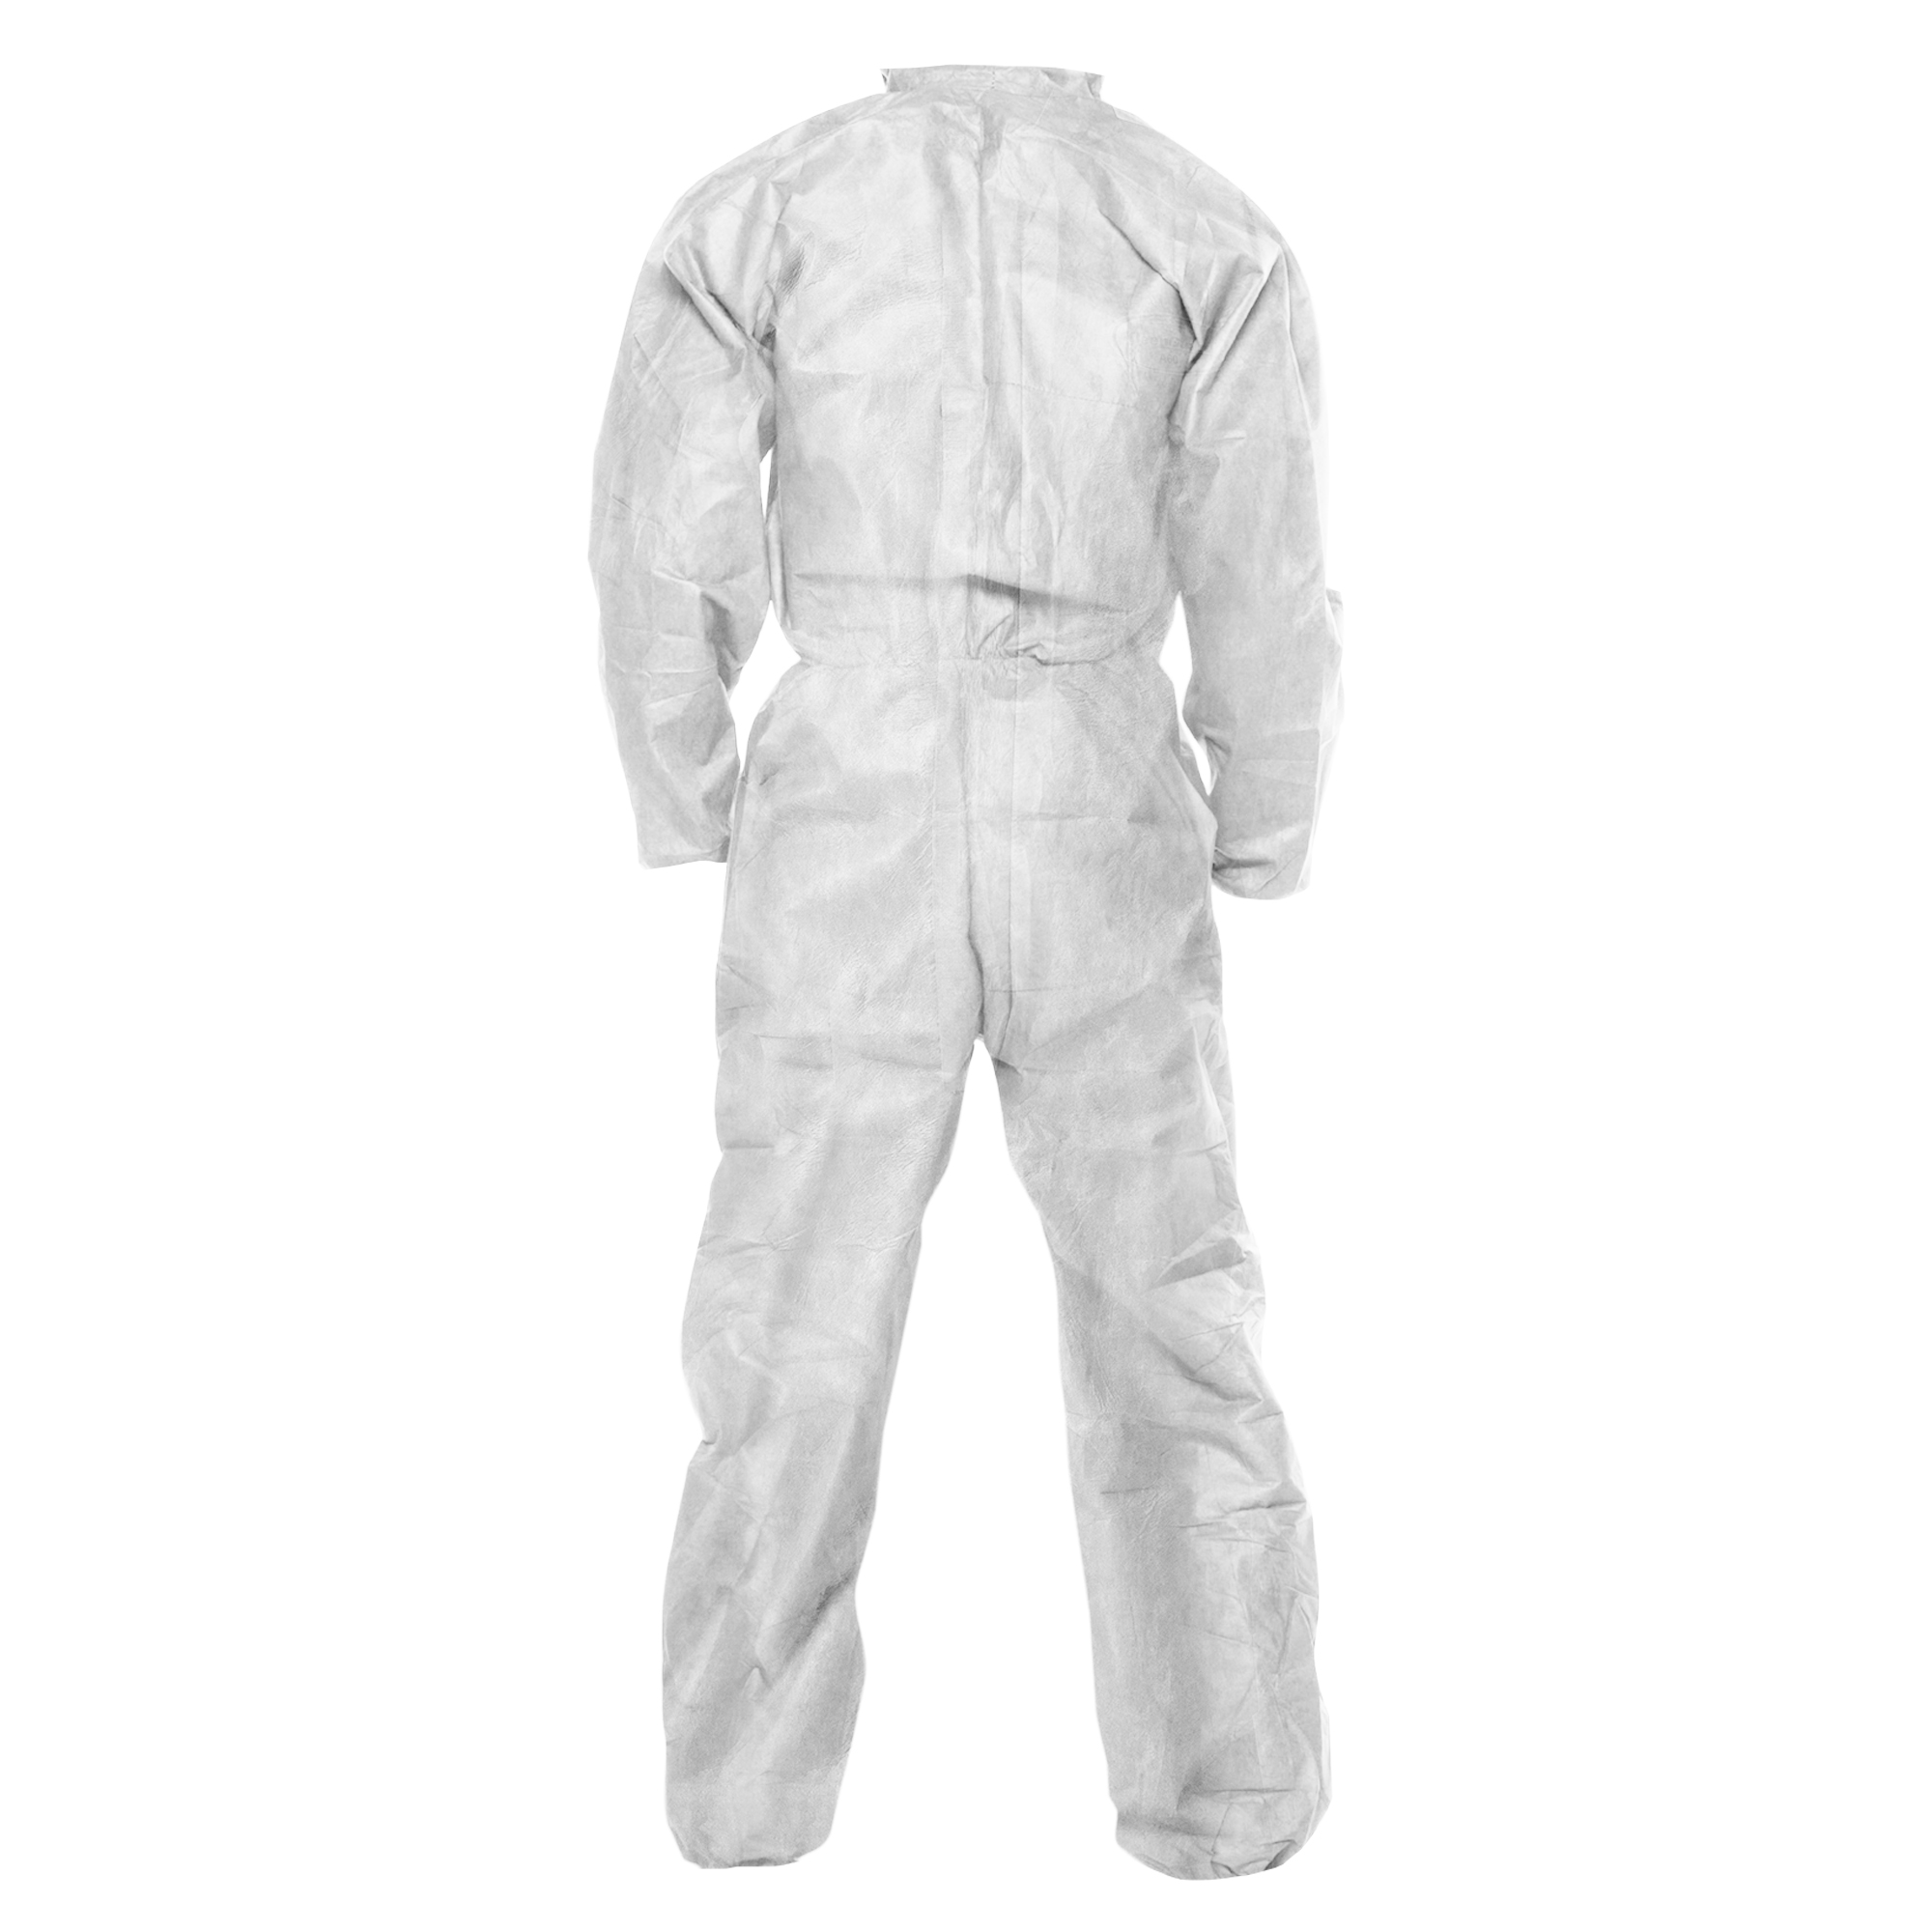 Picture of A20 Breathable Particle Protection Coveralls, 4X-Large, White, 20/Carton